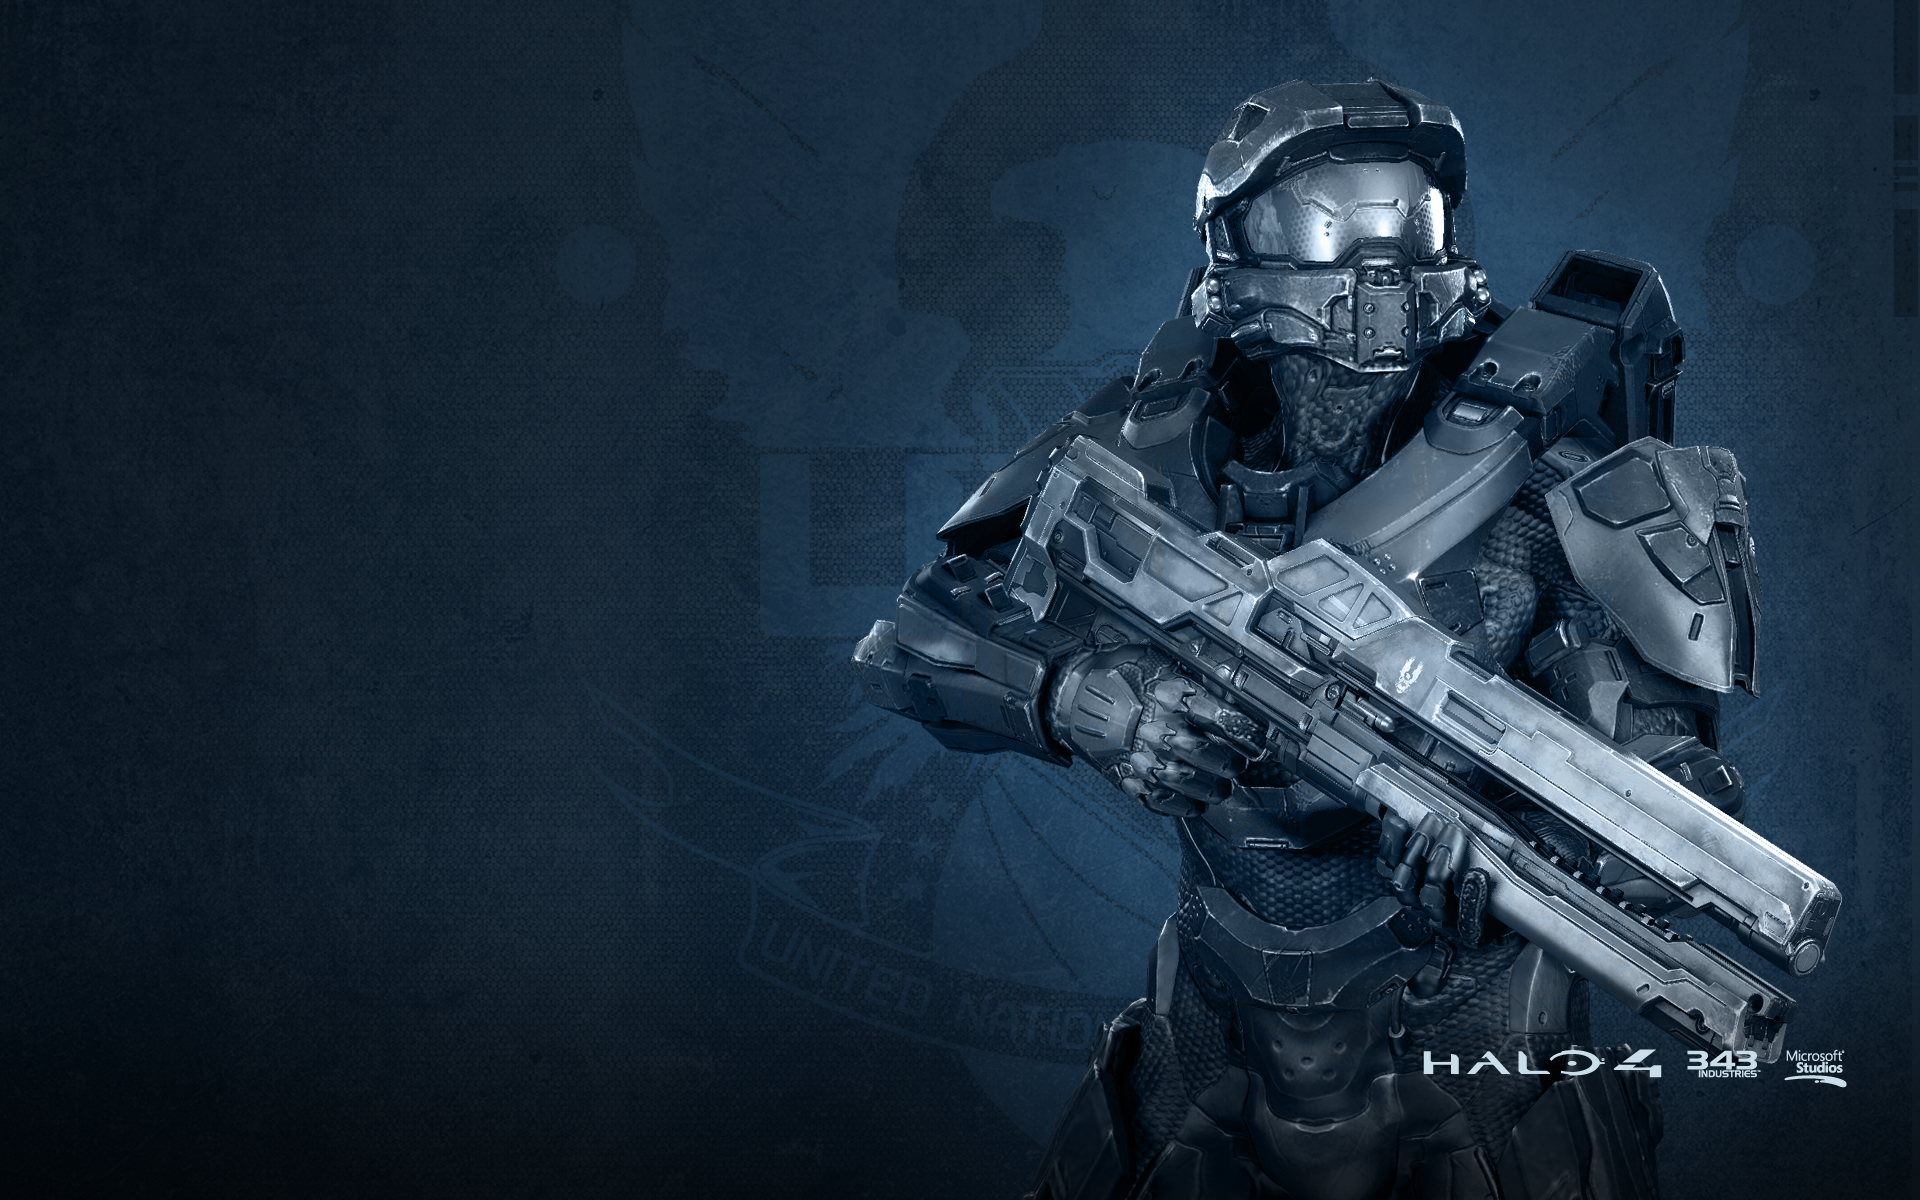 Halo 4 Master Chief Wallpapers | Wallpapers HD1920 x 1200